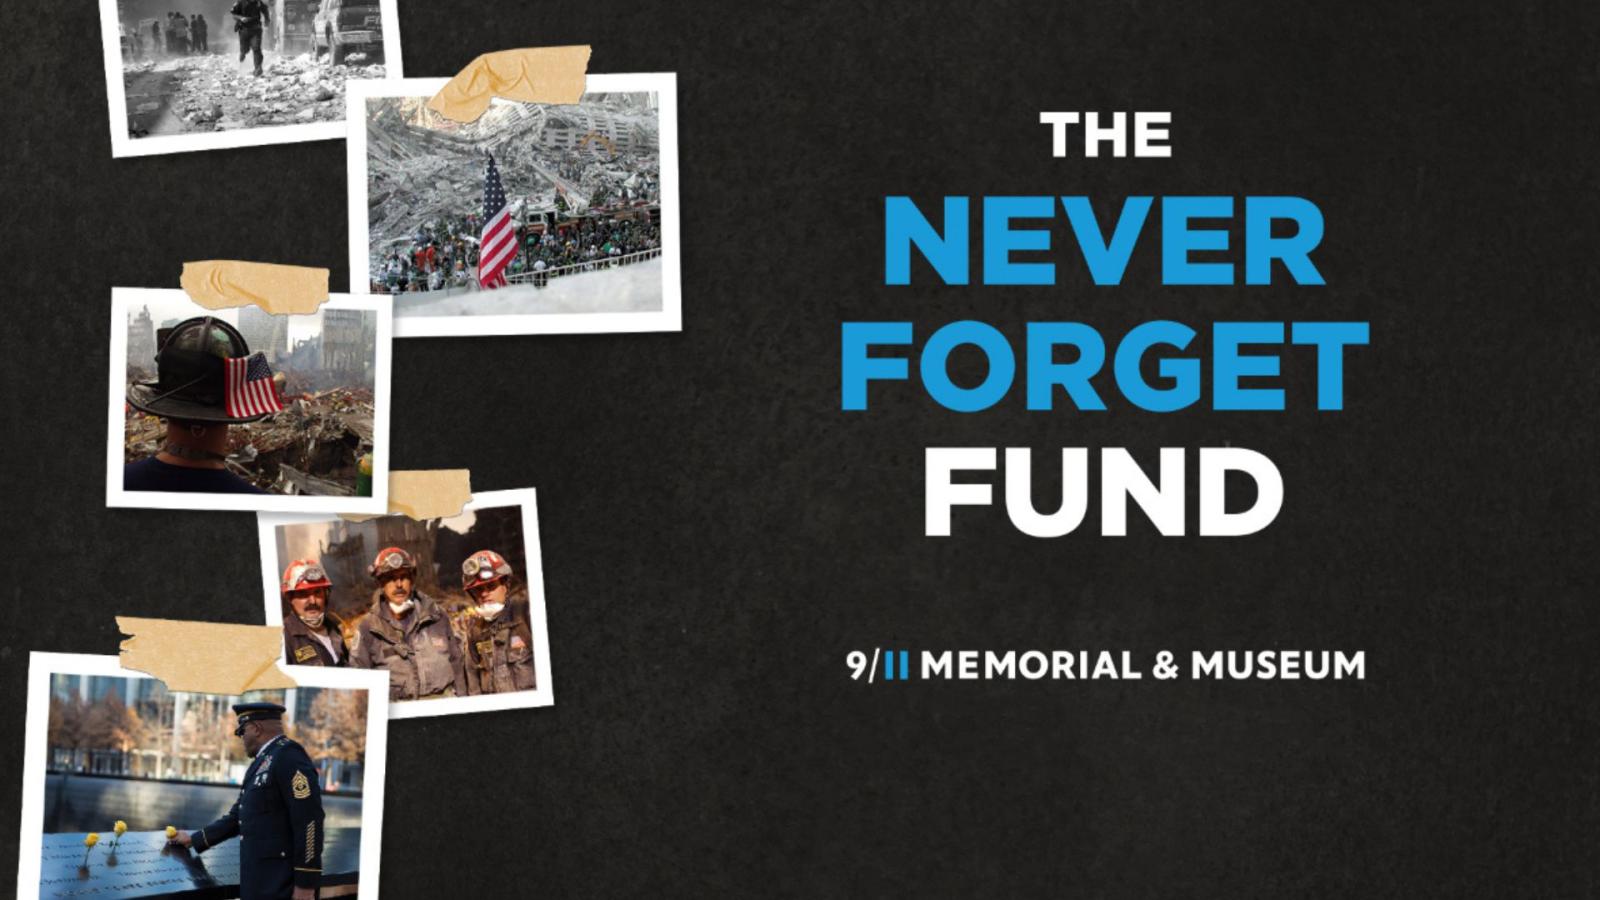 Four images of the rescue and recovery effort appear as photos taped onto a black background, with The Never Forget Fund logo on right